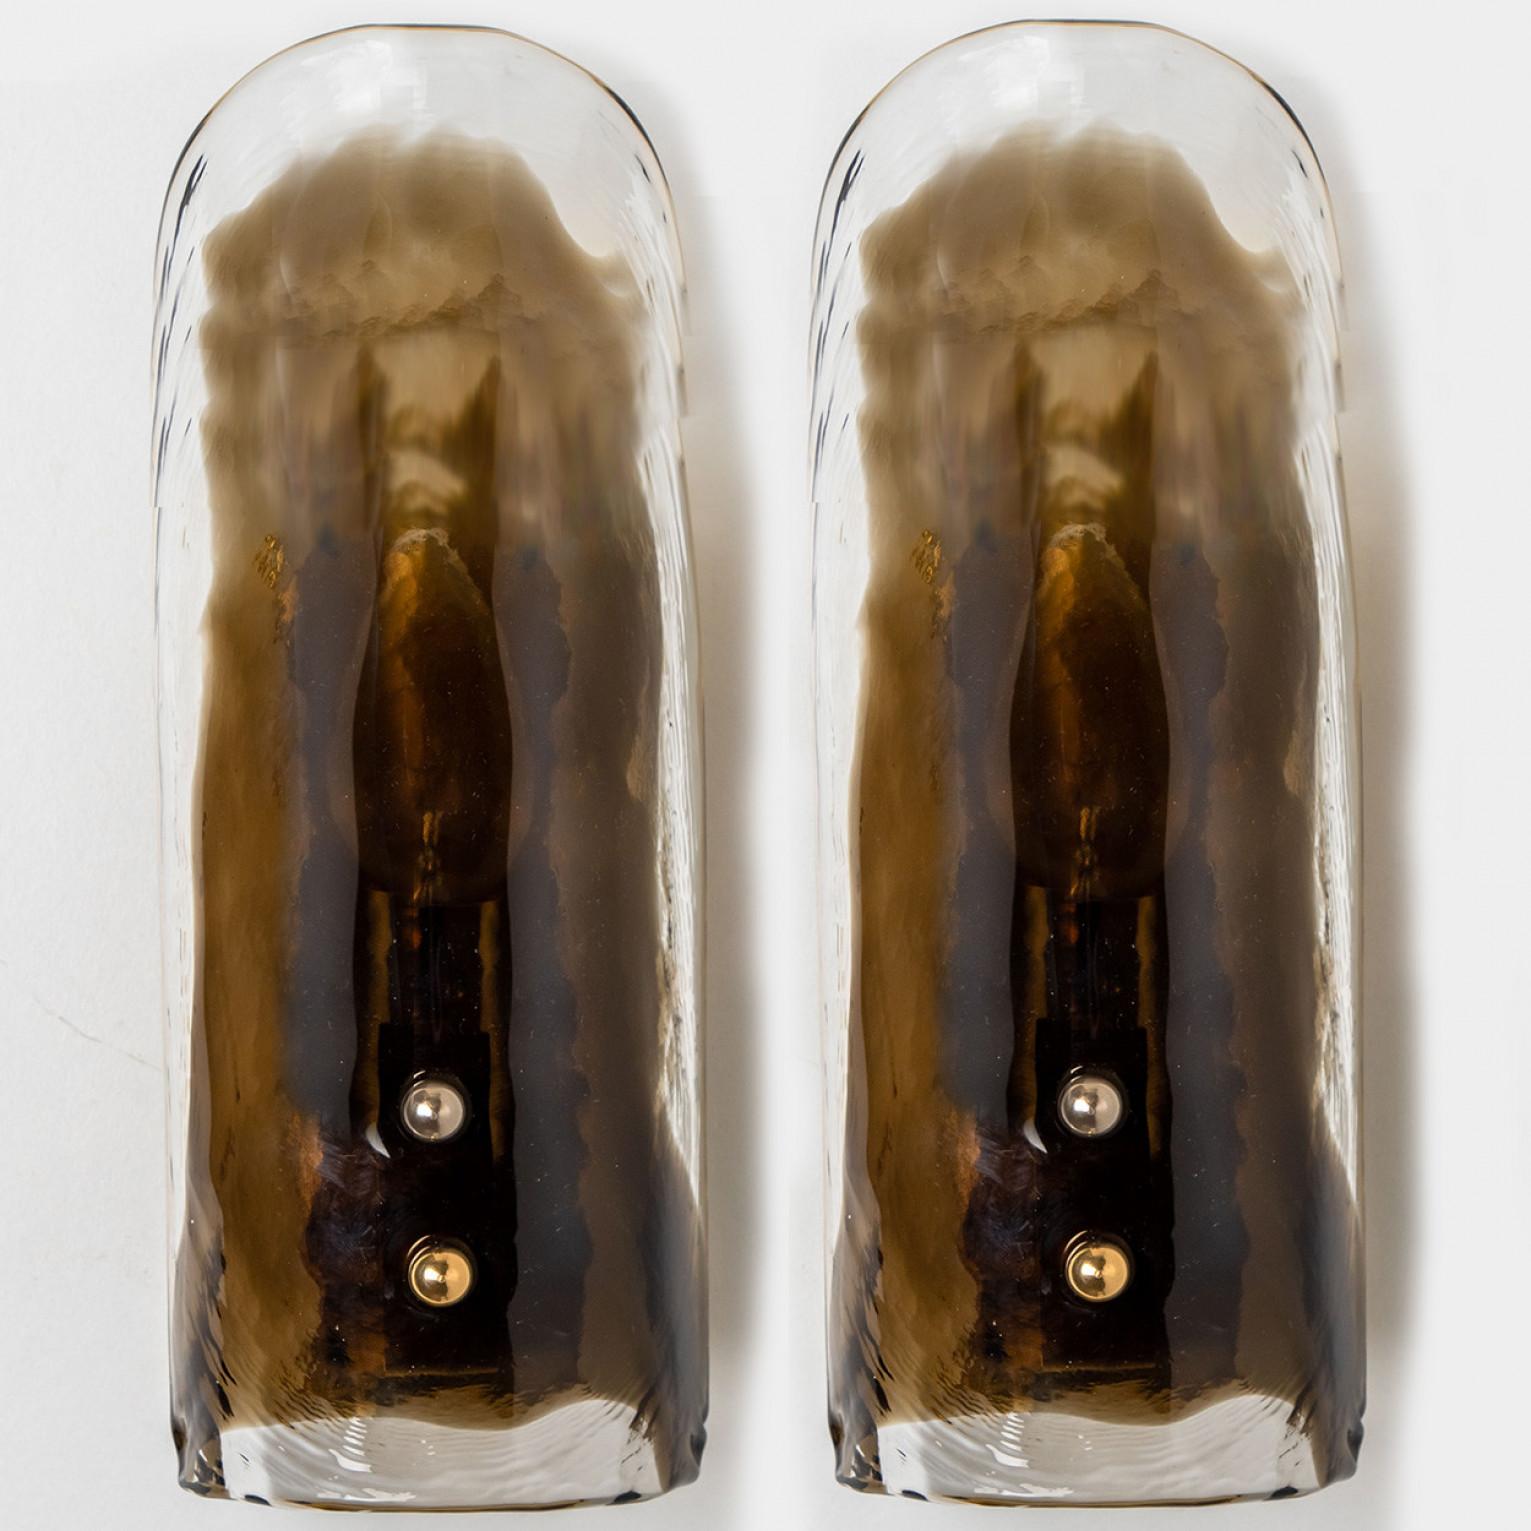 High-end wall sconces made of blown clear and opal Murano glass on a brass hardware. Designed and produced by J.T. Kalmar, Austria in the 1960s. Minimalistic design executed with a taste for excellence in craftsmanship. These are real statement